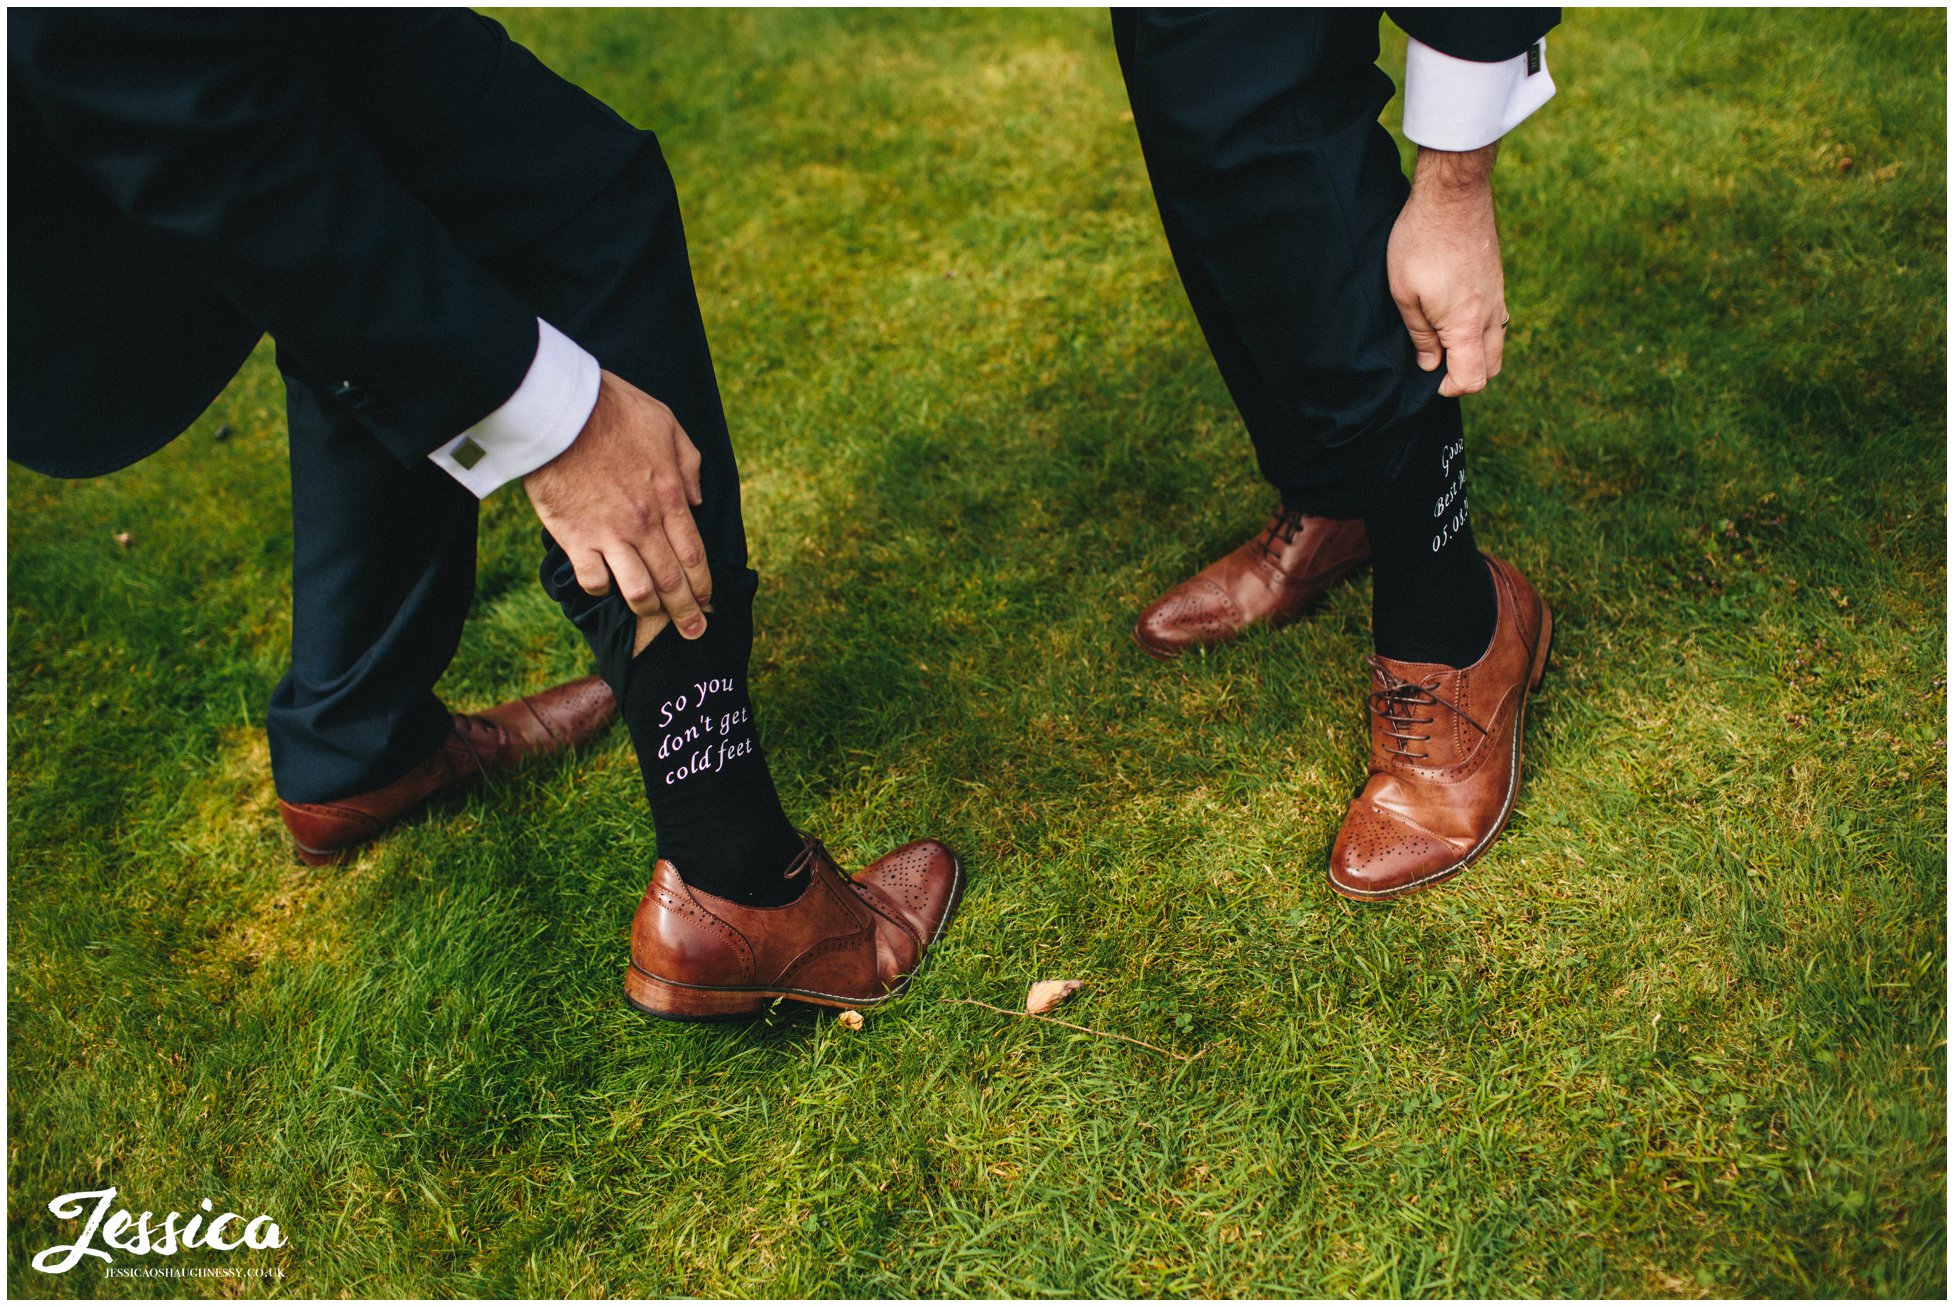 groom shows guest 'so you don't get cold feet' socks